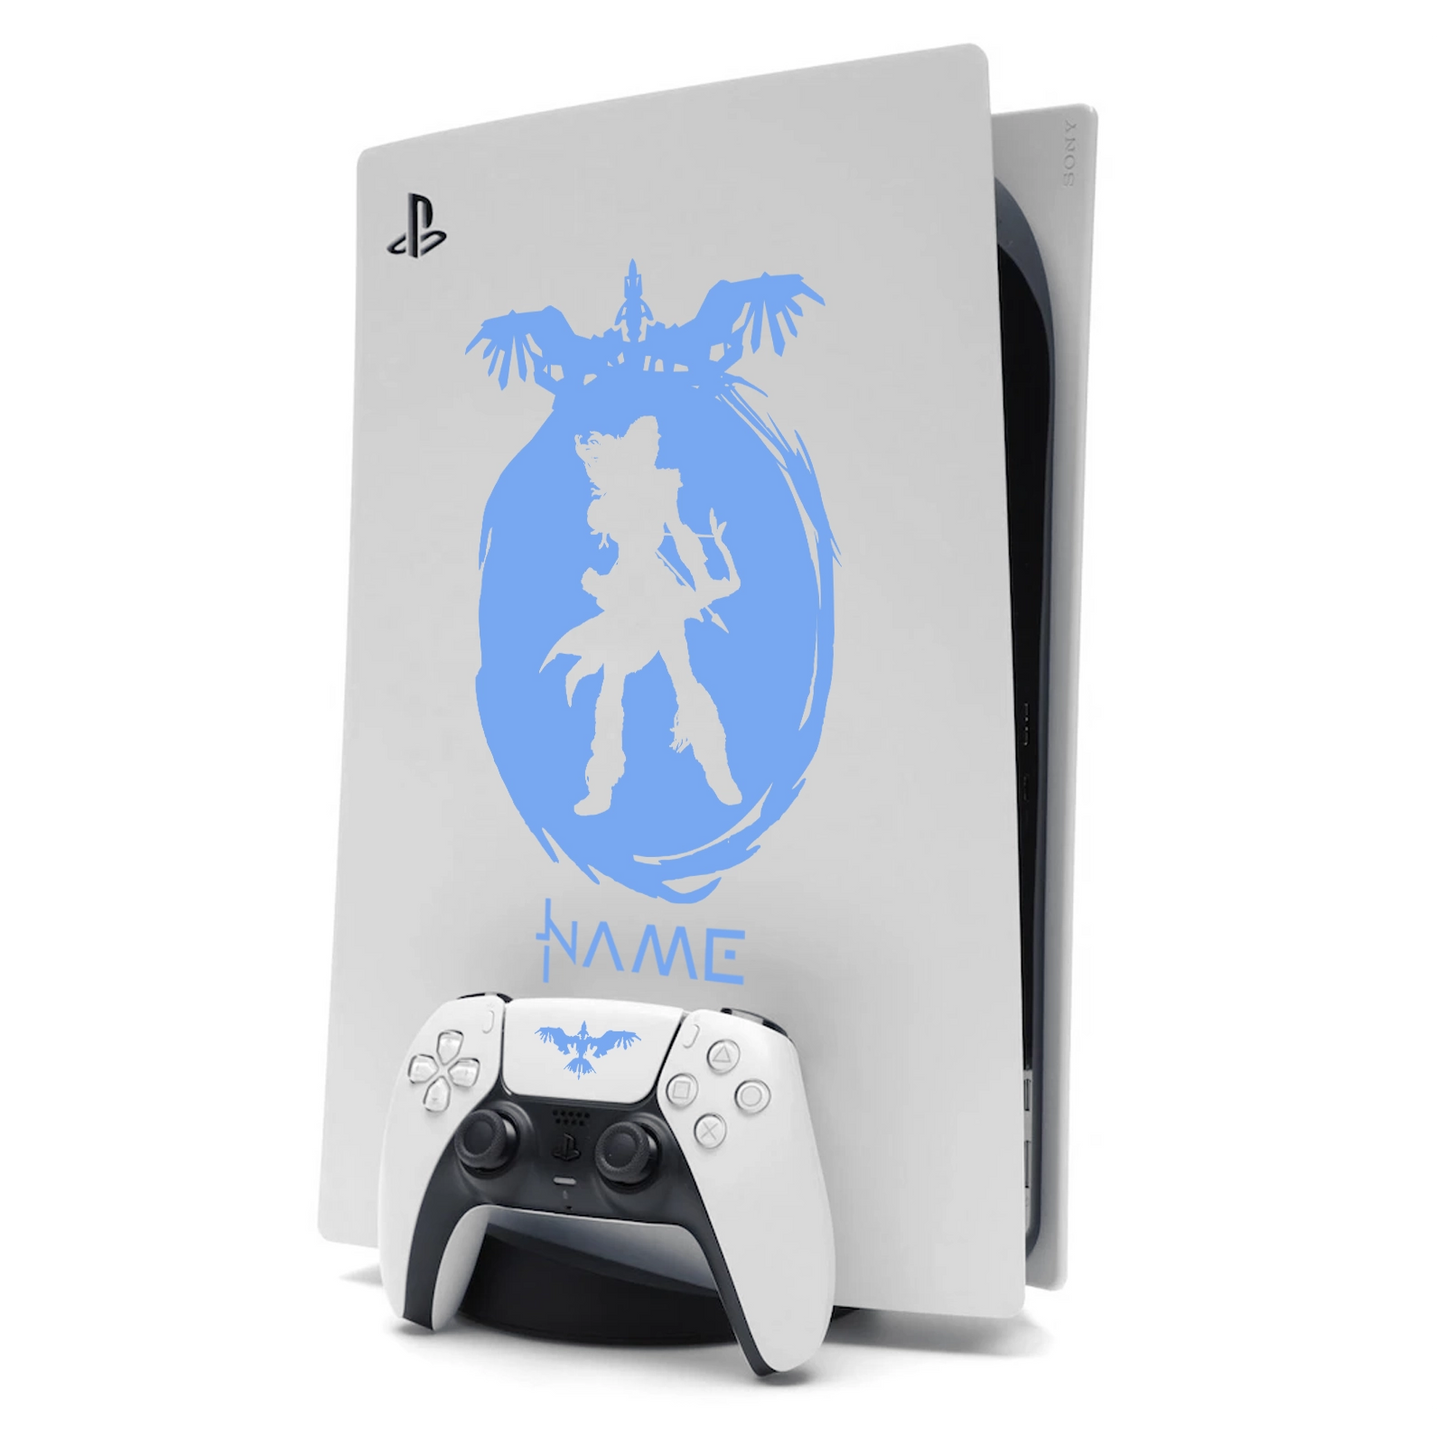 Horizon Aloy PS5 Sticker Skin for Playstation 5 in Blue